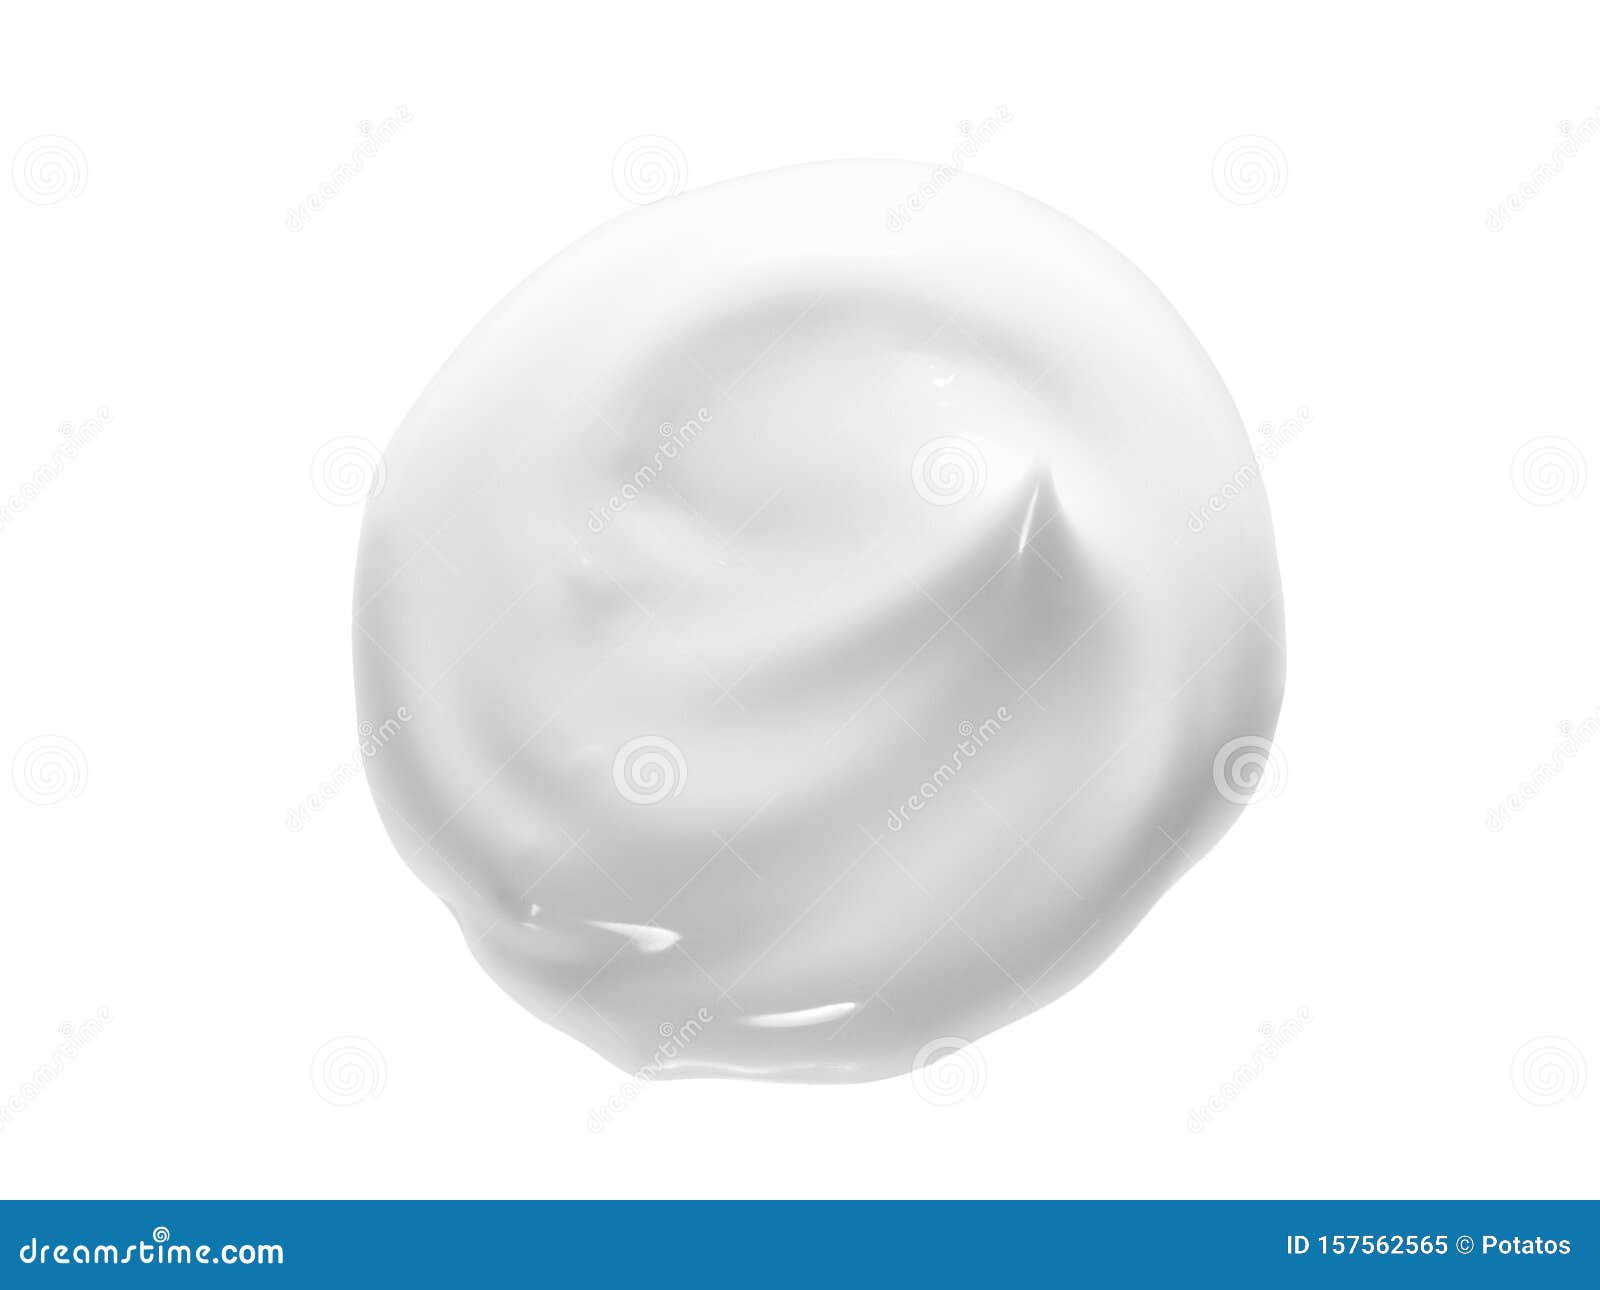 white face cream swirl swatch . body lotion drop. cosmetic makeup product sample on white background